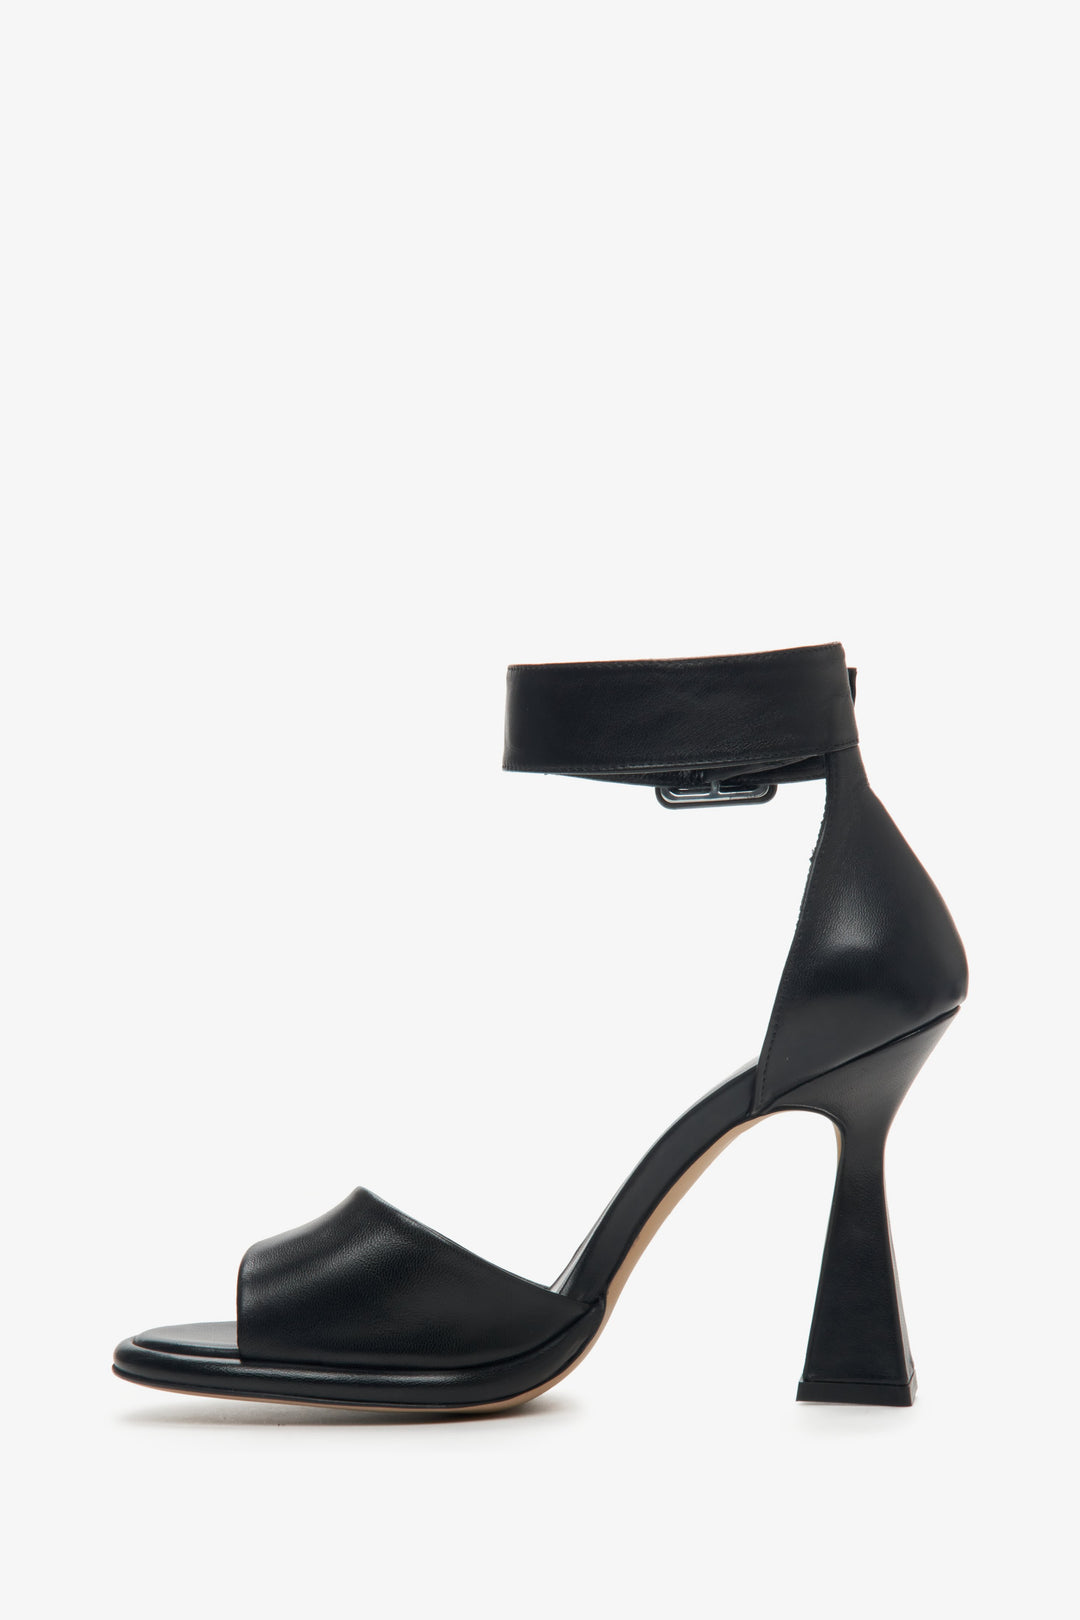 Women's Estro natural leather sandals fastened at the ankle with a funnel heel, black color.